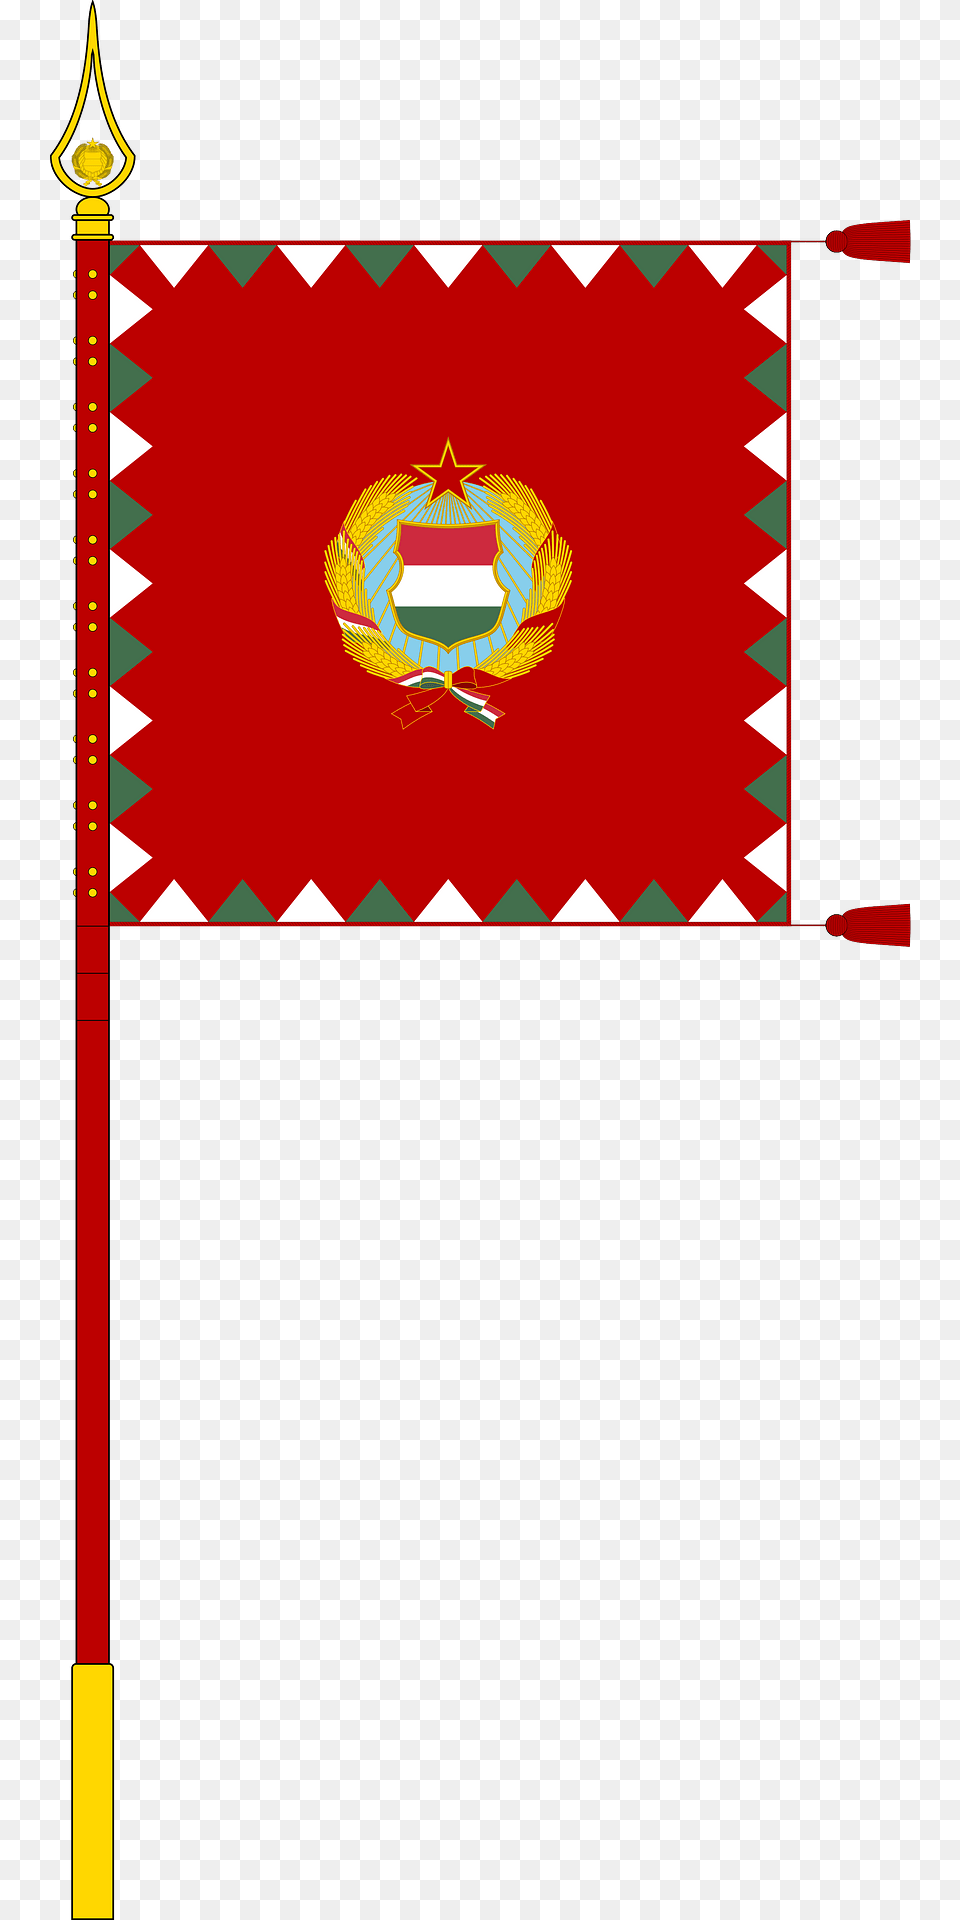 Standard For Motorised Rifle Regiments Of The Hungarian People39s Army 1957 1976 With Staff Clipart Png